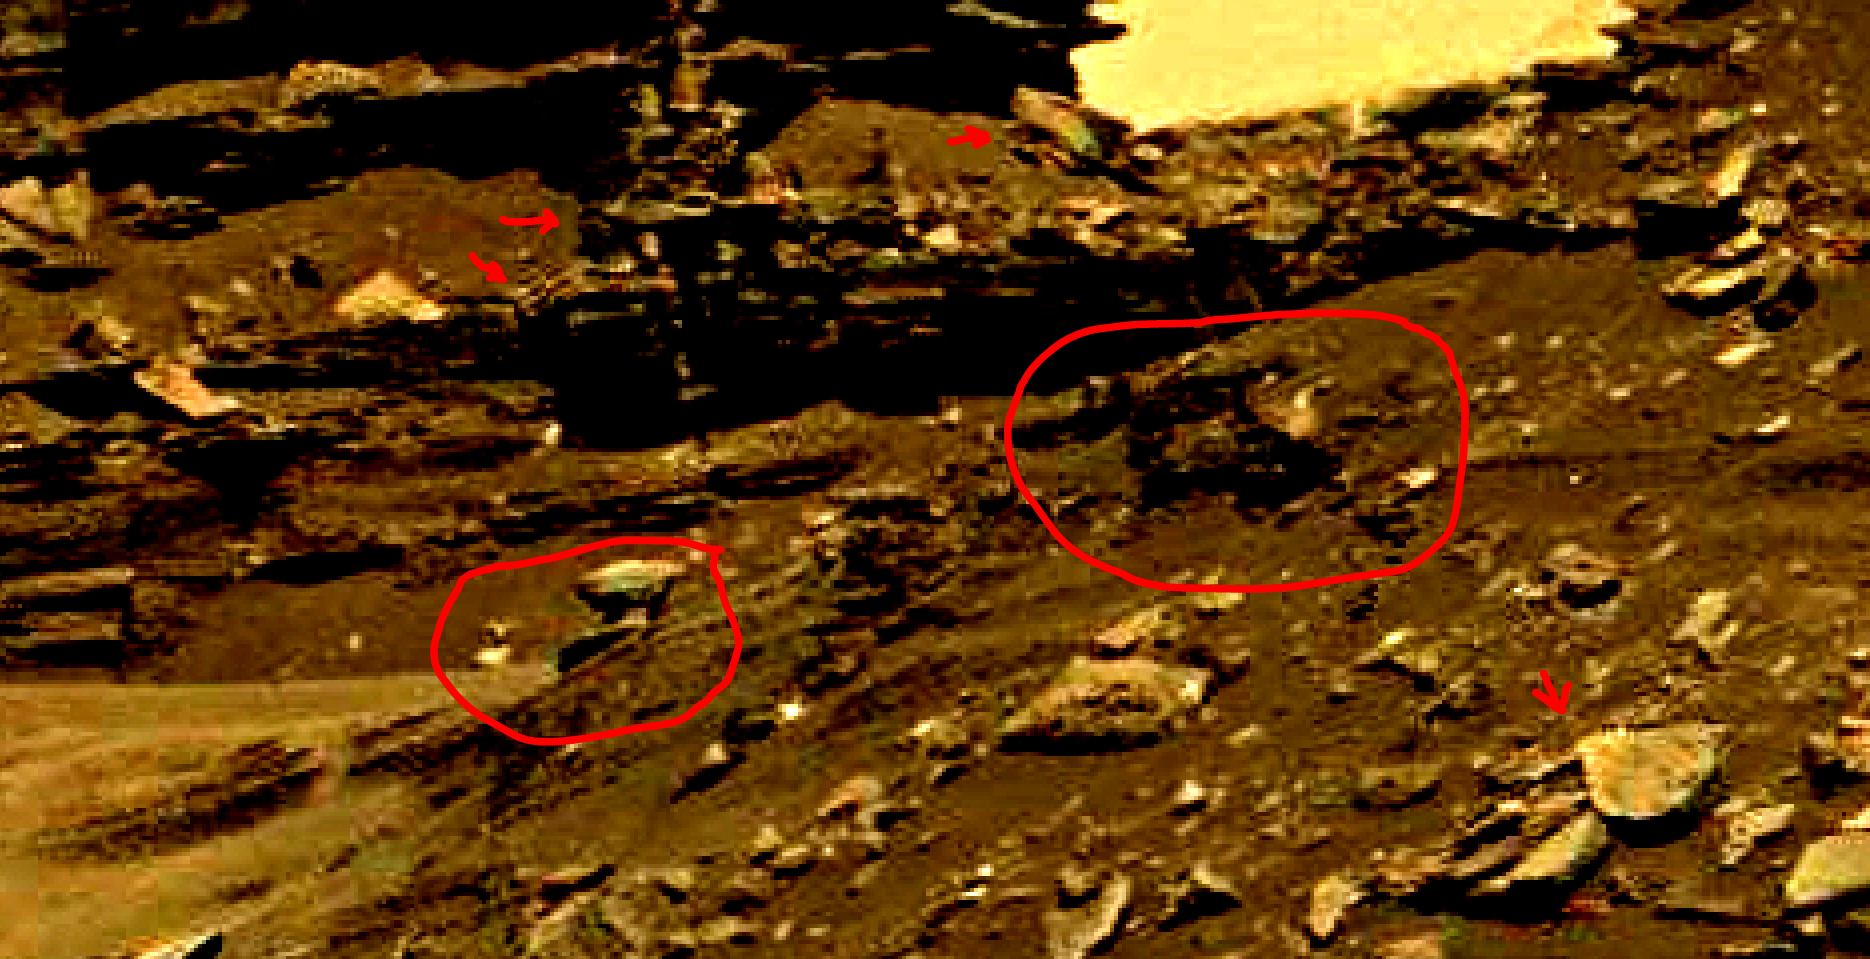 mars-sol-1454-anomaly-artifacts-22a-was-life-on-mars